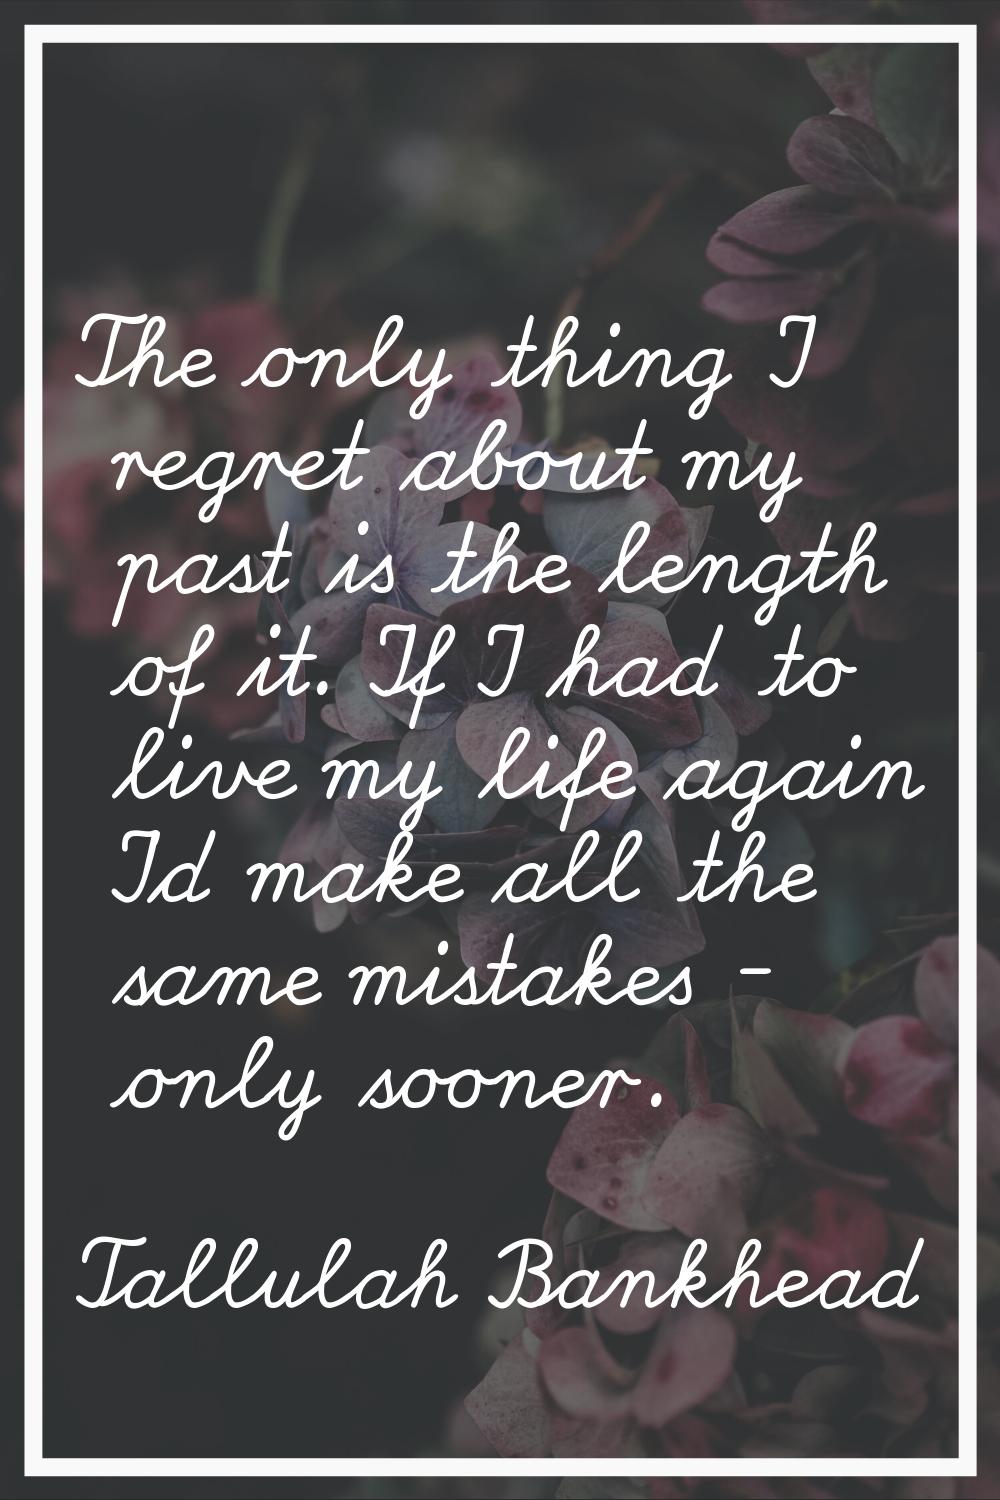 The only thing I regret about my past is the length of it. If I had to live my life again I'd make 